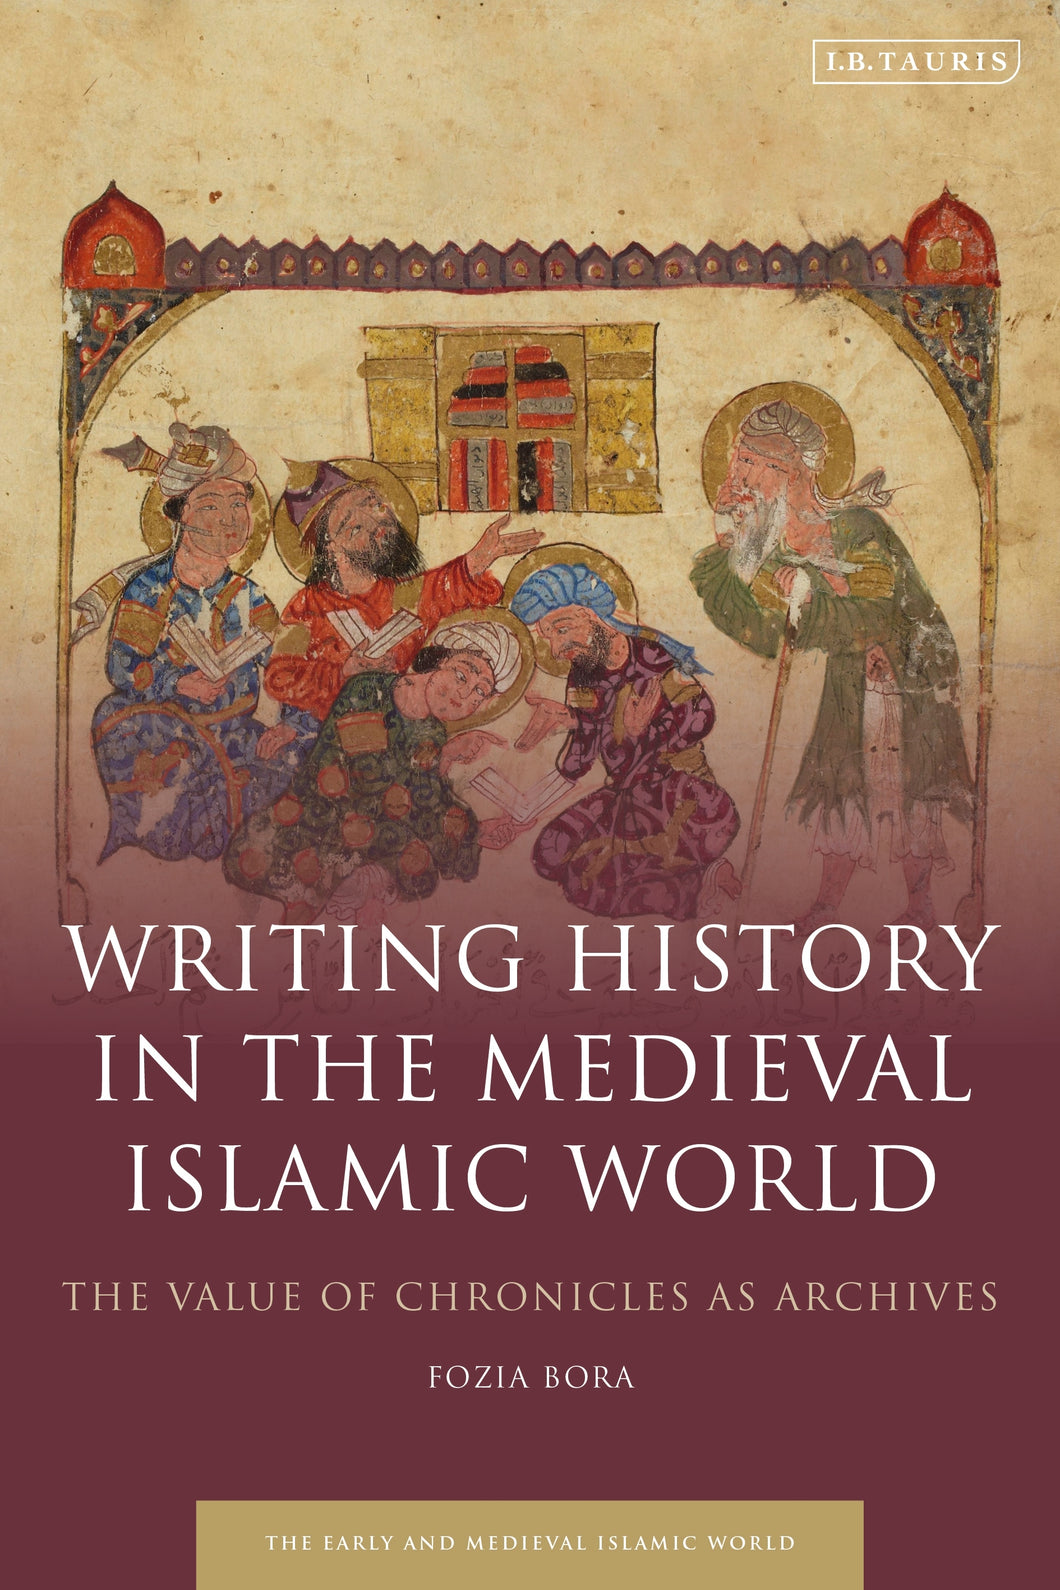 Writing History in the Medieval Islamic World: The Value of Chronicles as Archives